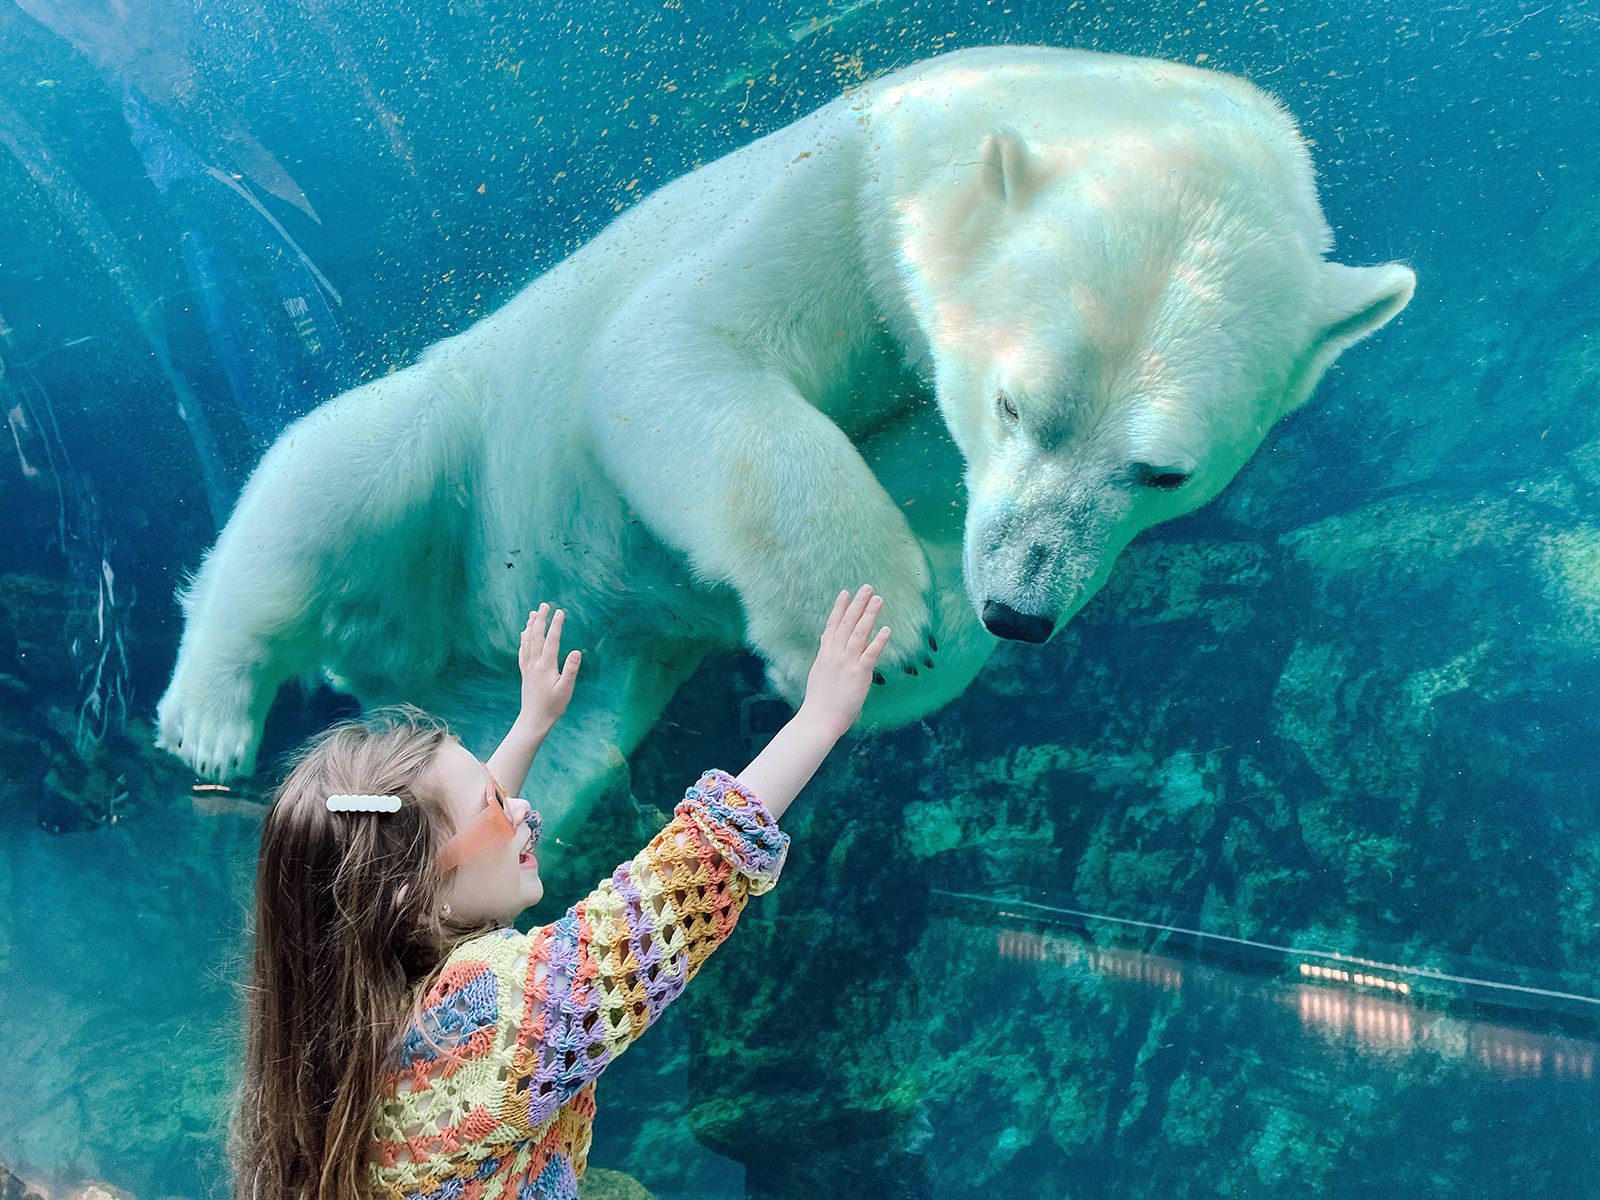 Child reaches up towards a polar bear swimming above her